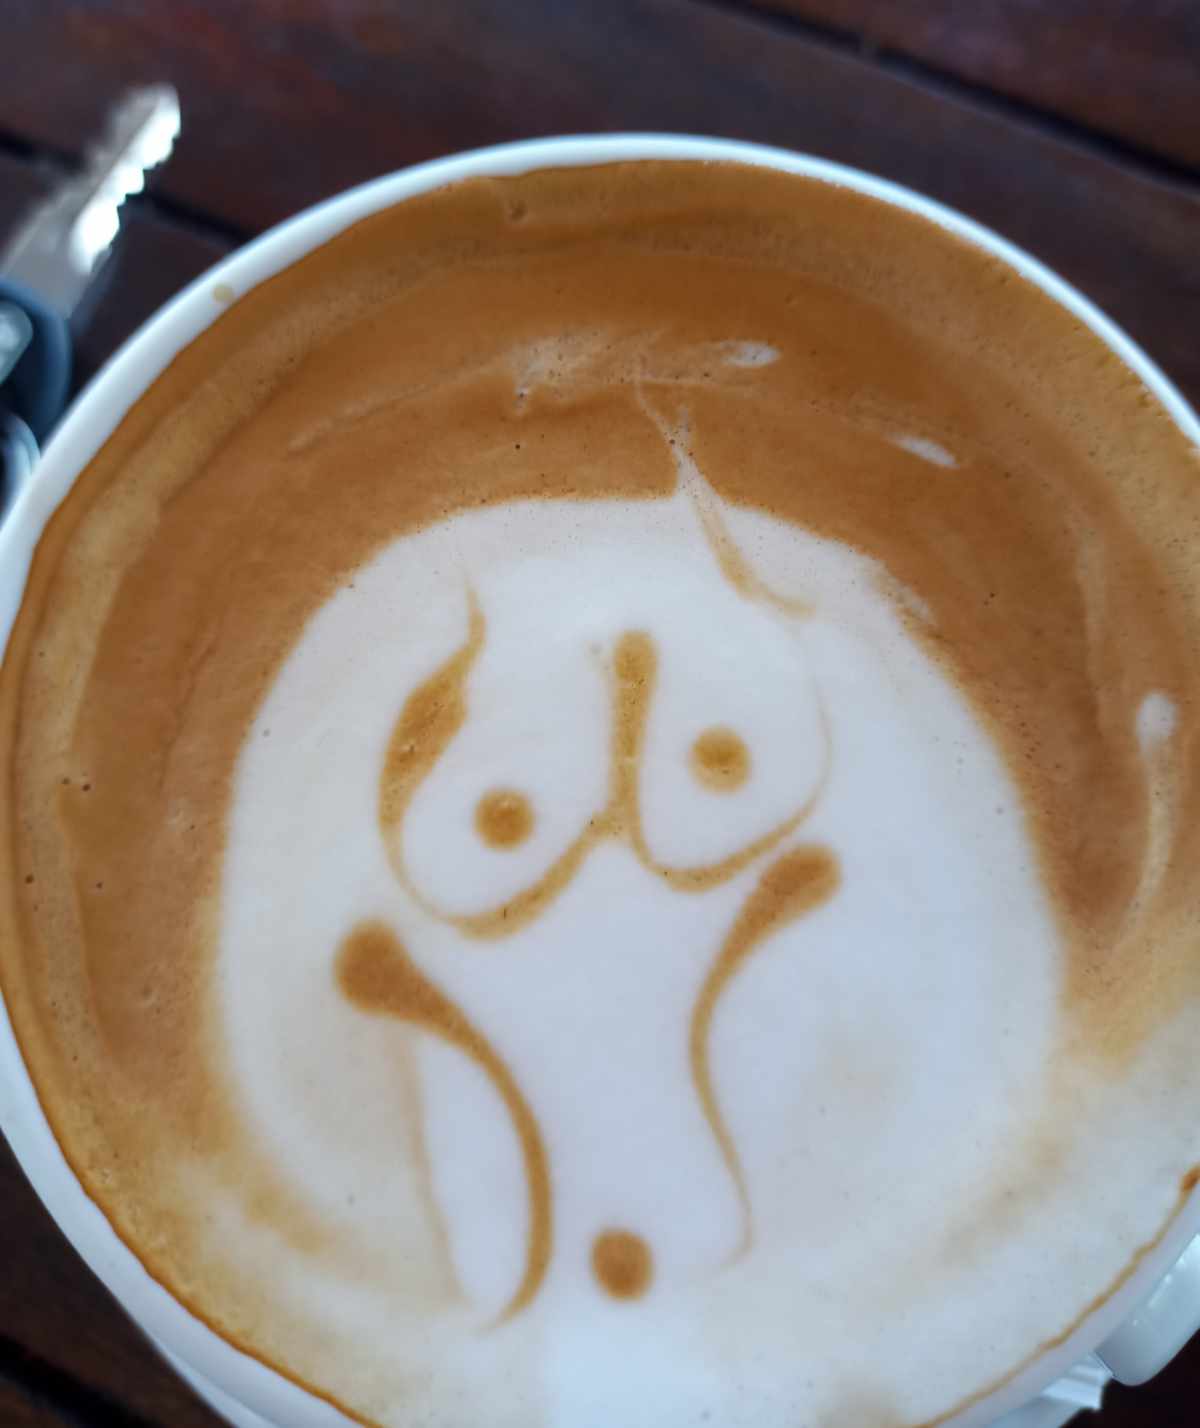 I ordered cappuccino in Greece